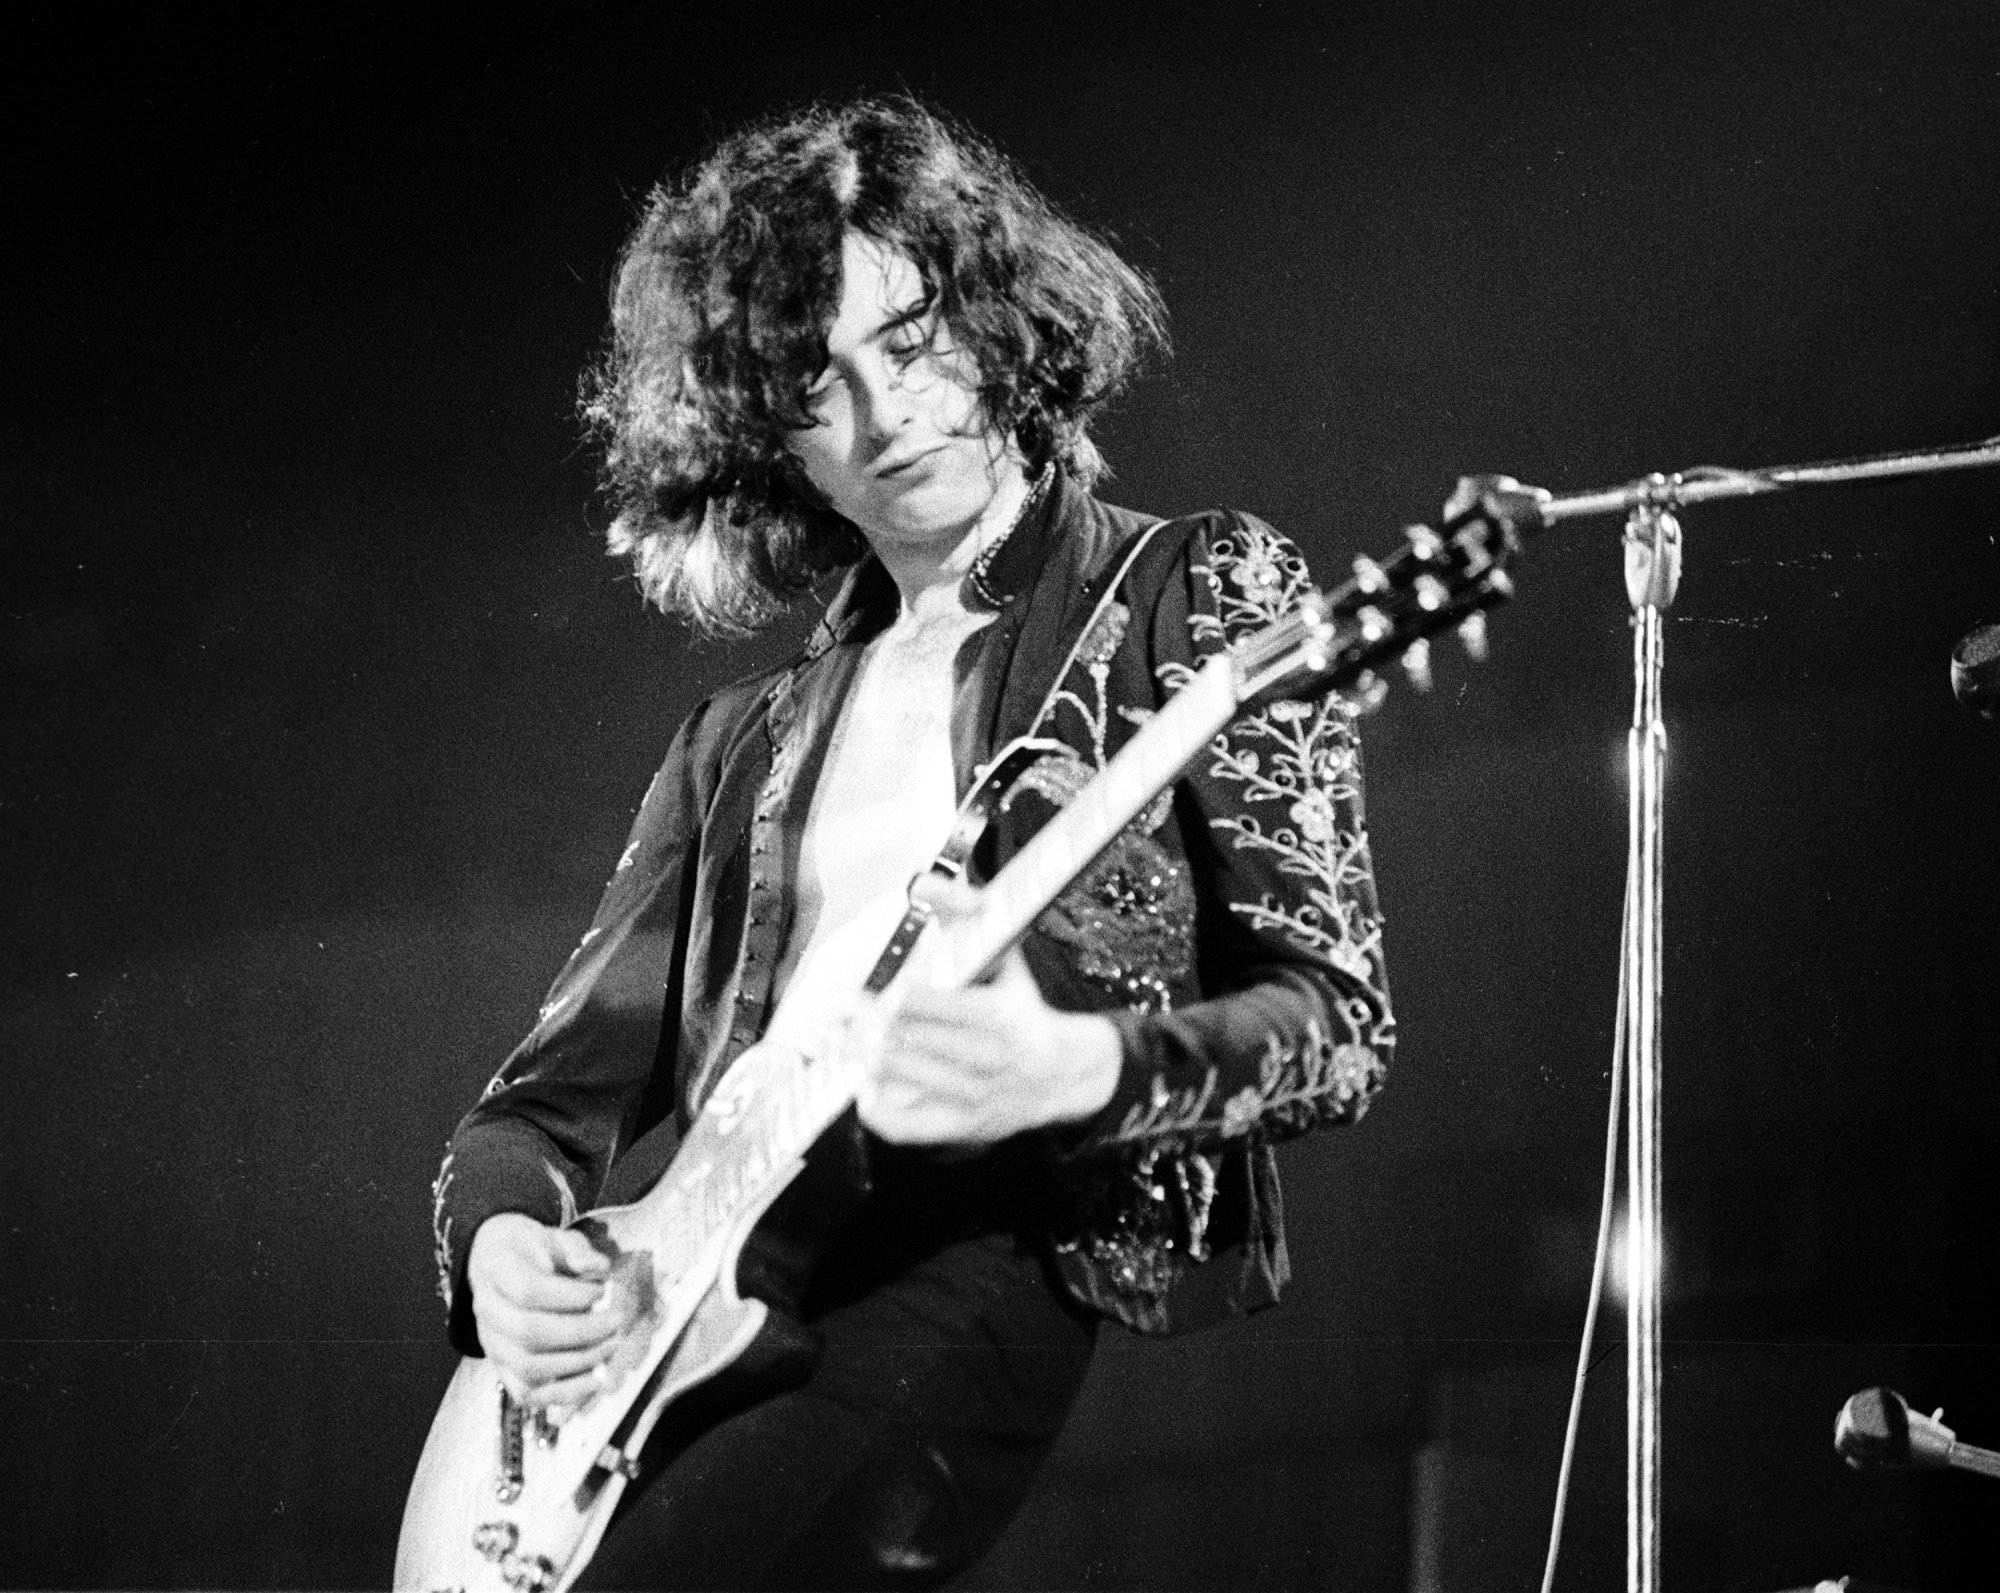 A black-and-white photo of Jimmy Page playing guitar